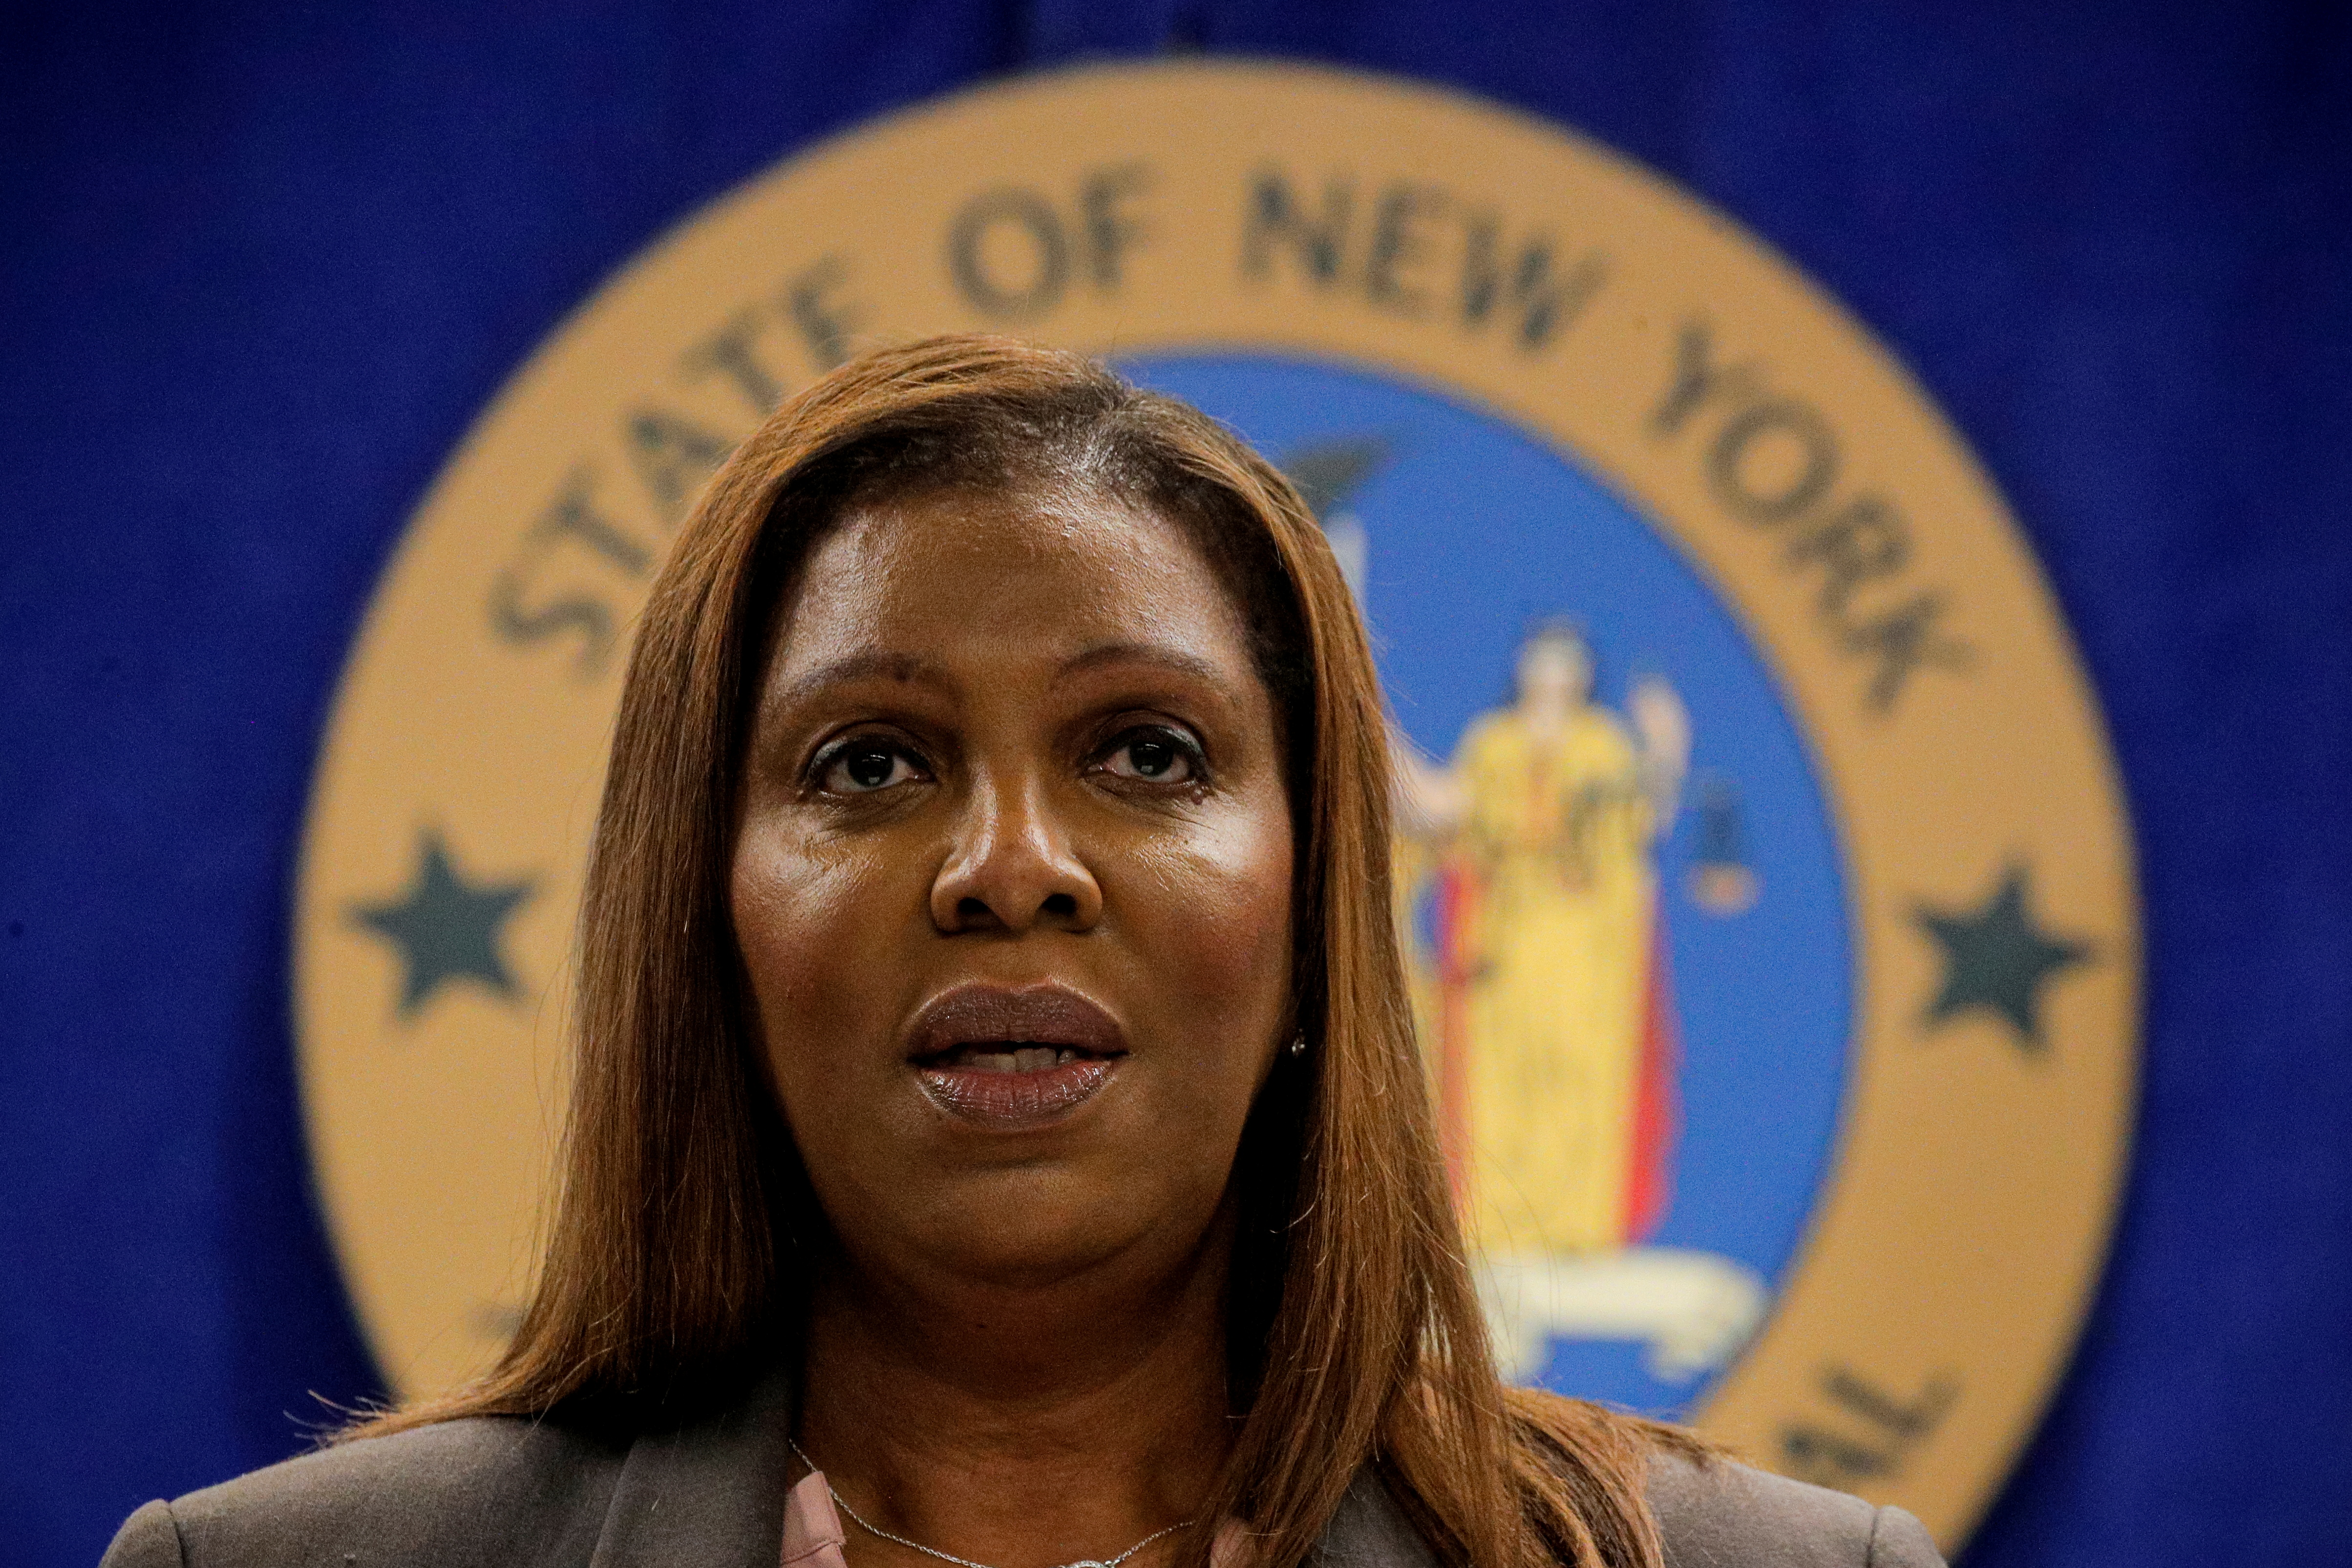 New York State Attorney General, Letitia James, speaks during a news conference, to announce criminal justice reform in New York City, U.S., May 21, 2021.  REUTERS/Brendan McDermid